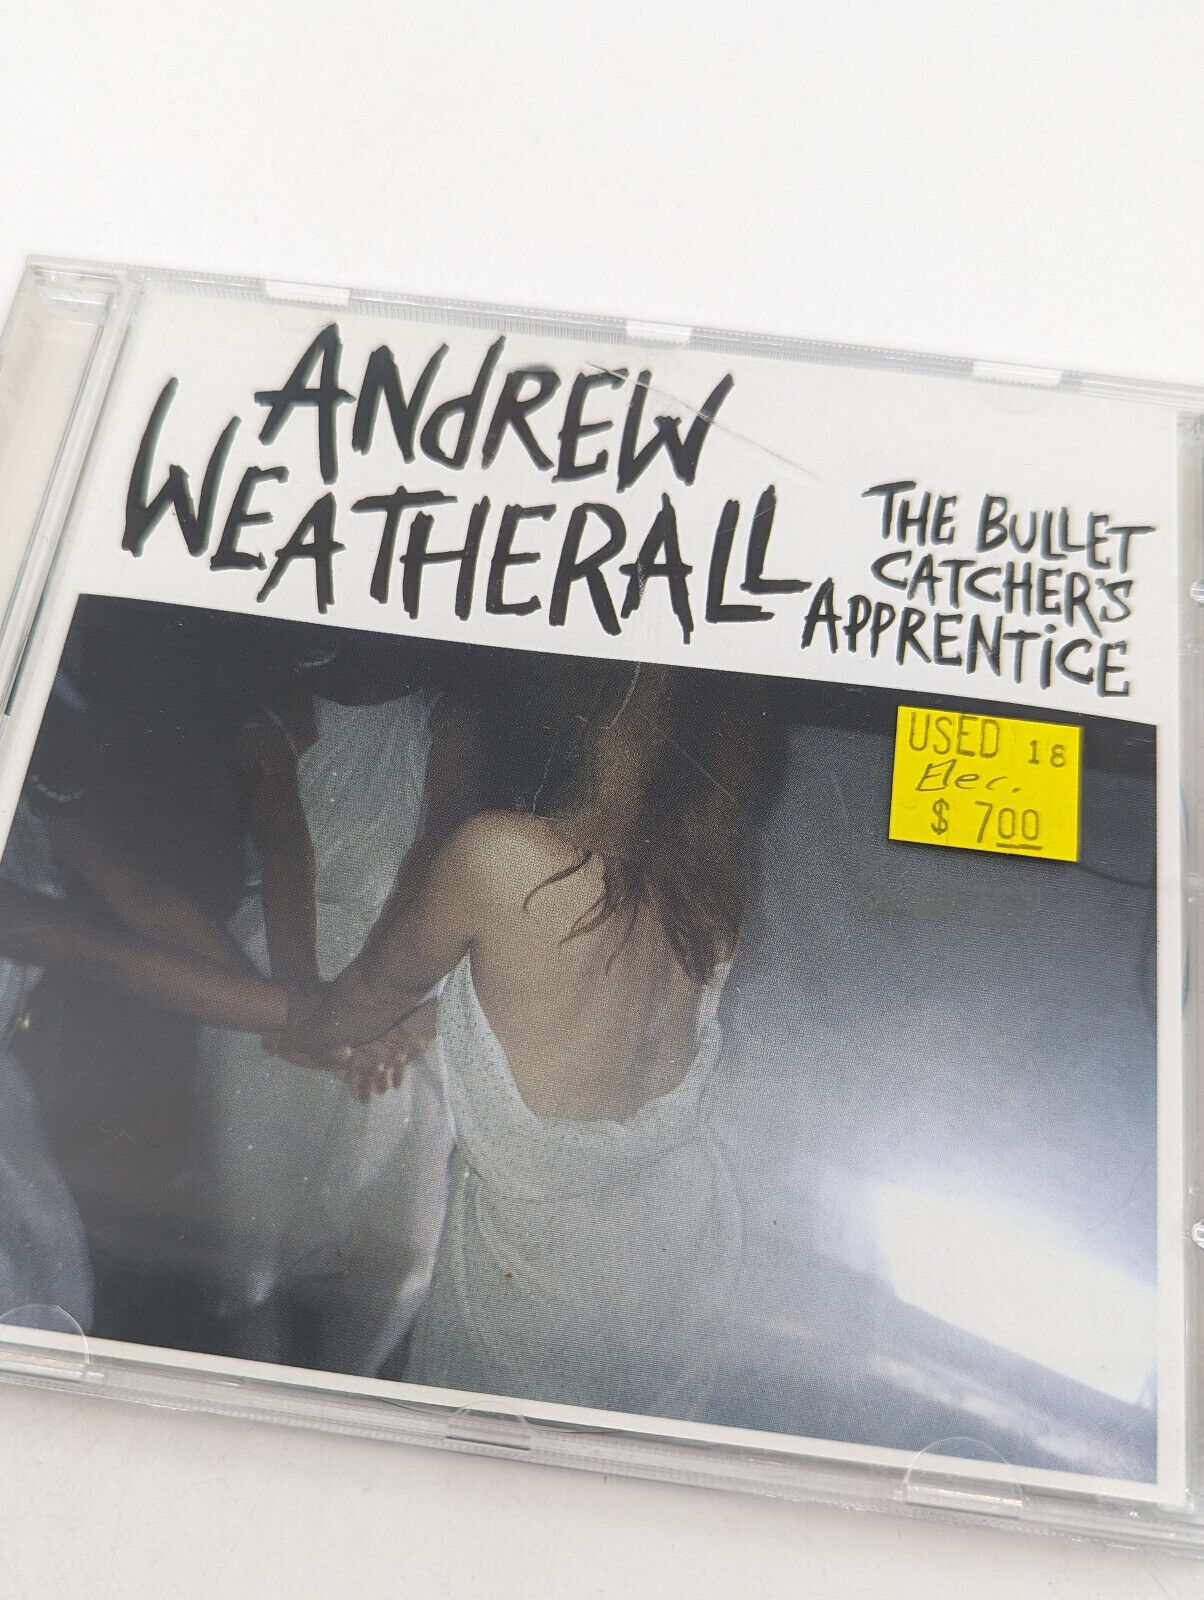 Andrew Weatherall THE BULLET CATCHER\'S APPRENTICE 2006 NEW WAVE TECHNO CD